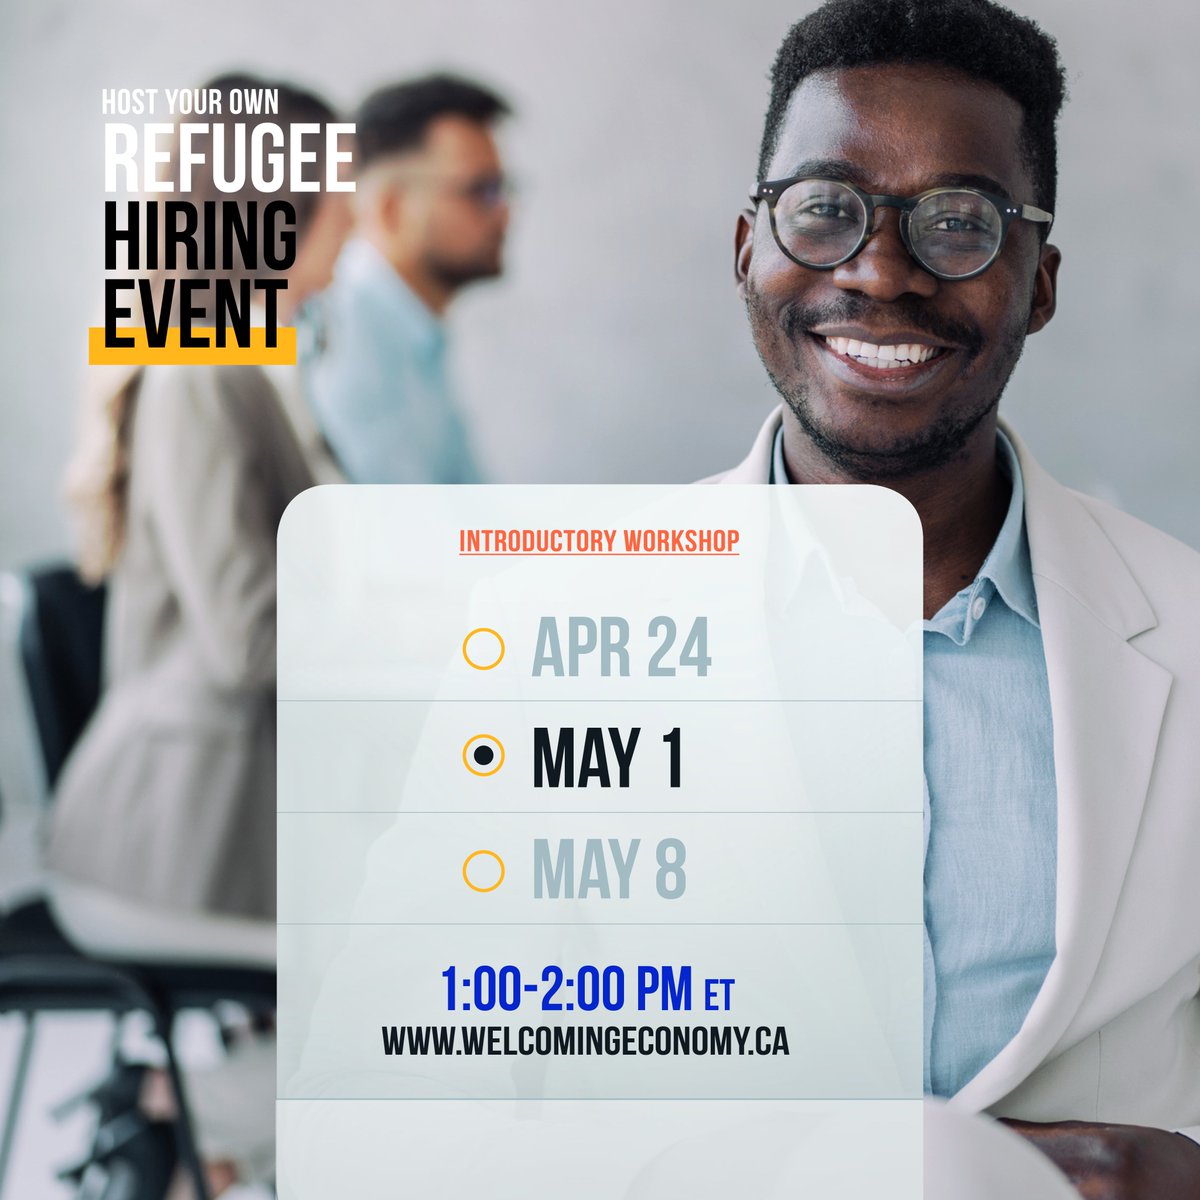 Get insights on planning a Refugee Hiring Event, with step-by-step lessons, informal coaching, and downloadable resources in this Introductory Workshop by #WelcomingEconomy! Register: bit.ly/we-training-20… #RefugeesWelcome #WithRefugees